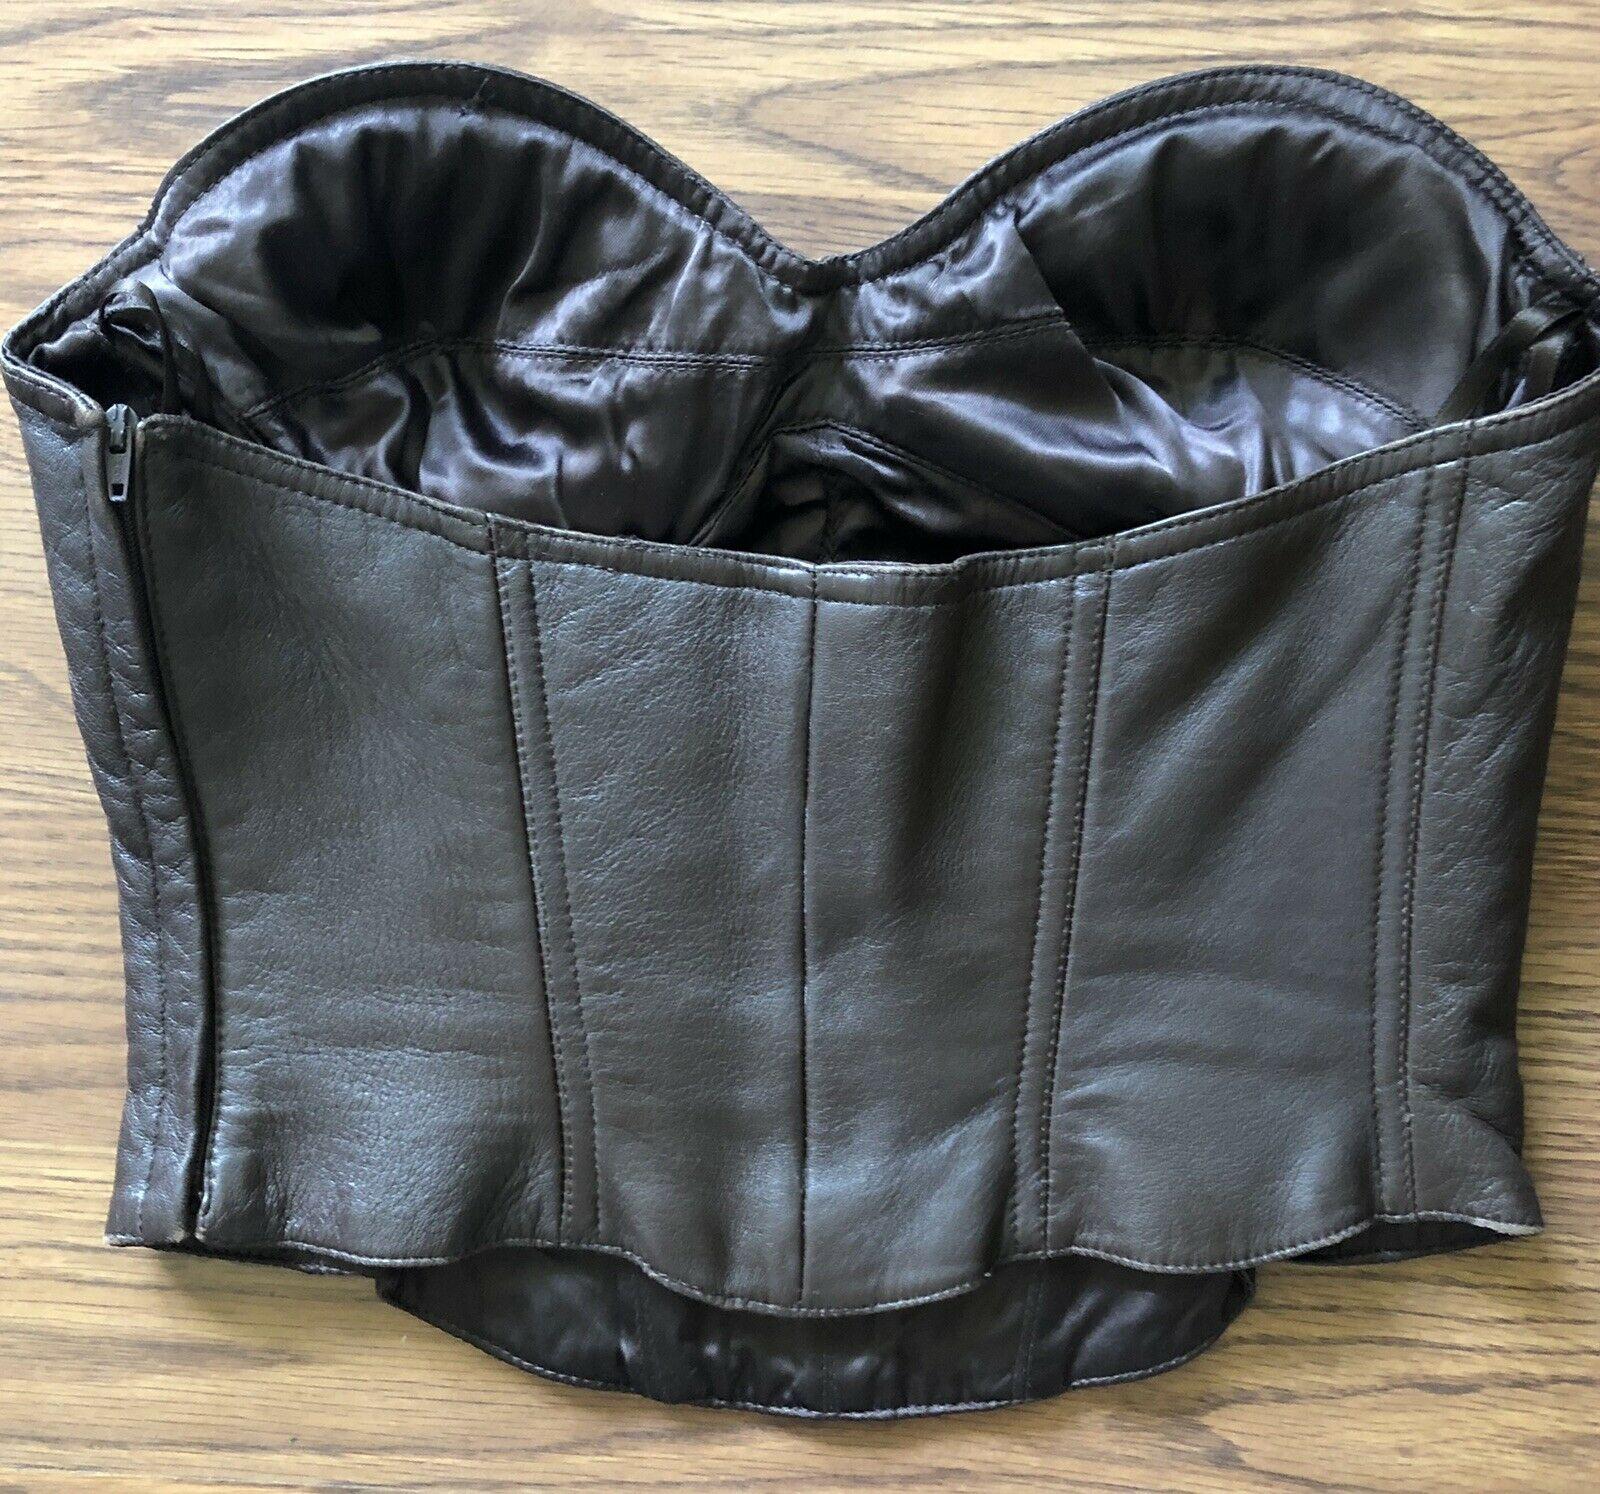 Thierry Mugler Couture Vintage Leather Bustier Top

Thierry Mugler leather cropped bustier top featuring concealed zip closure at side.

About Mugler:

Thierry Mugler's first collection, presented in 1973, was called Cafe de Paris and featured his